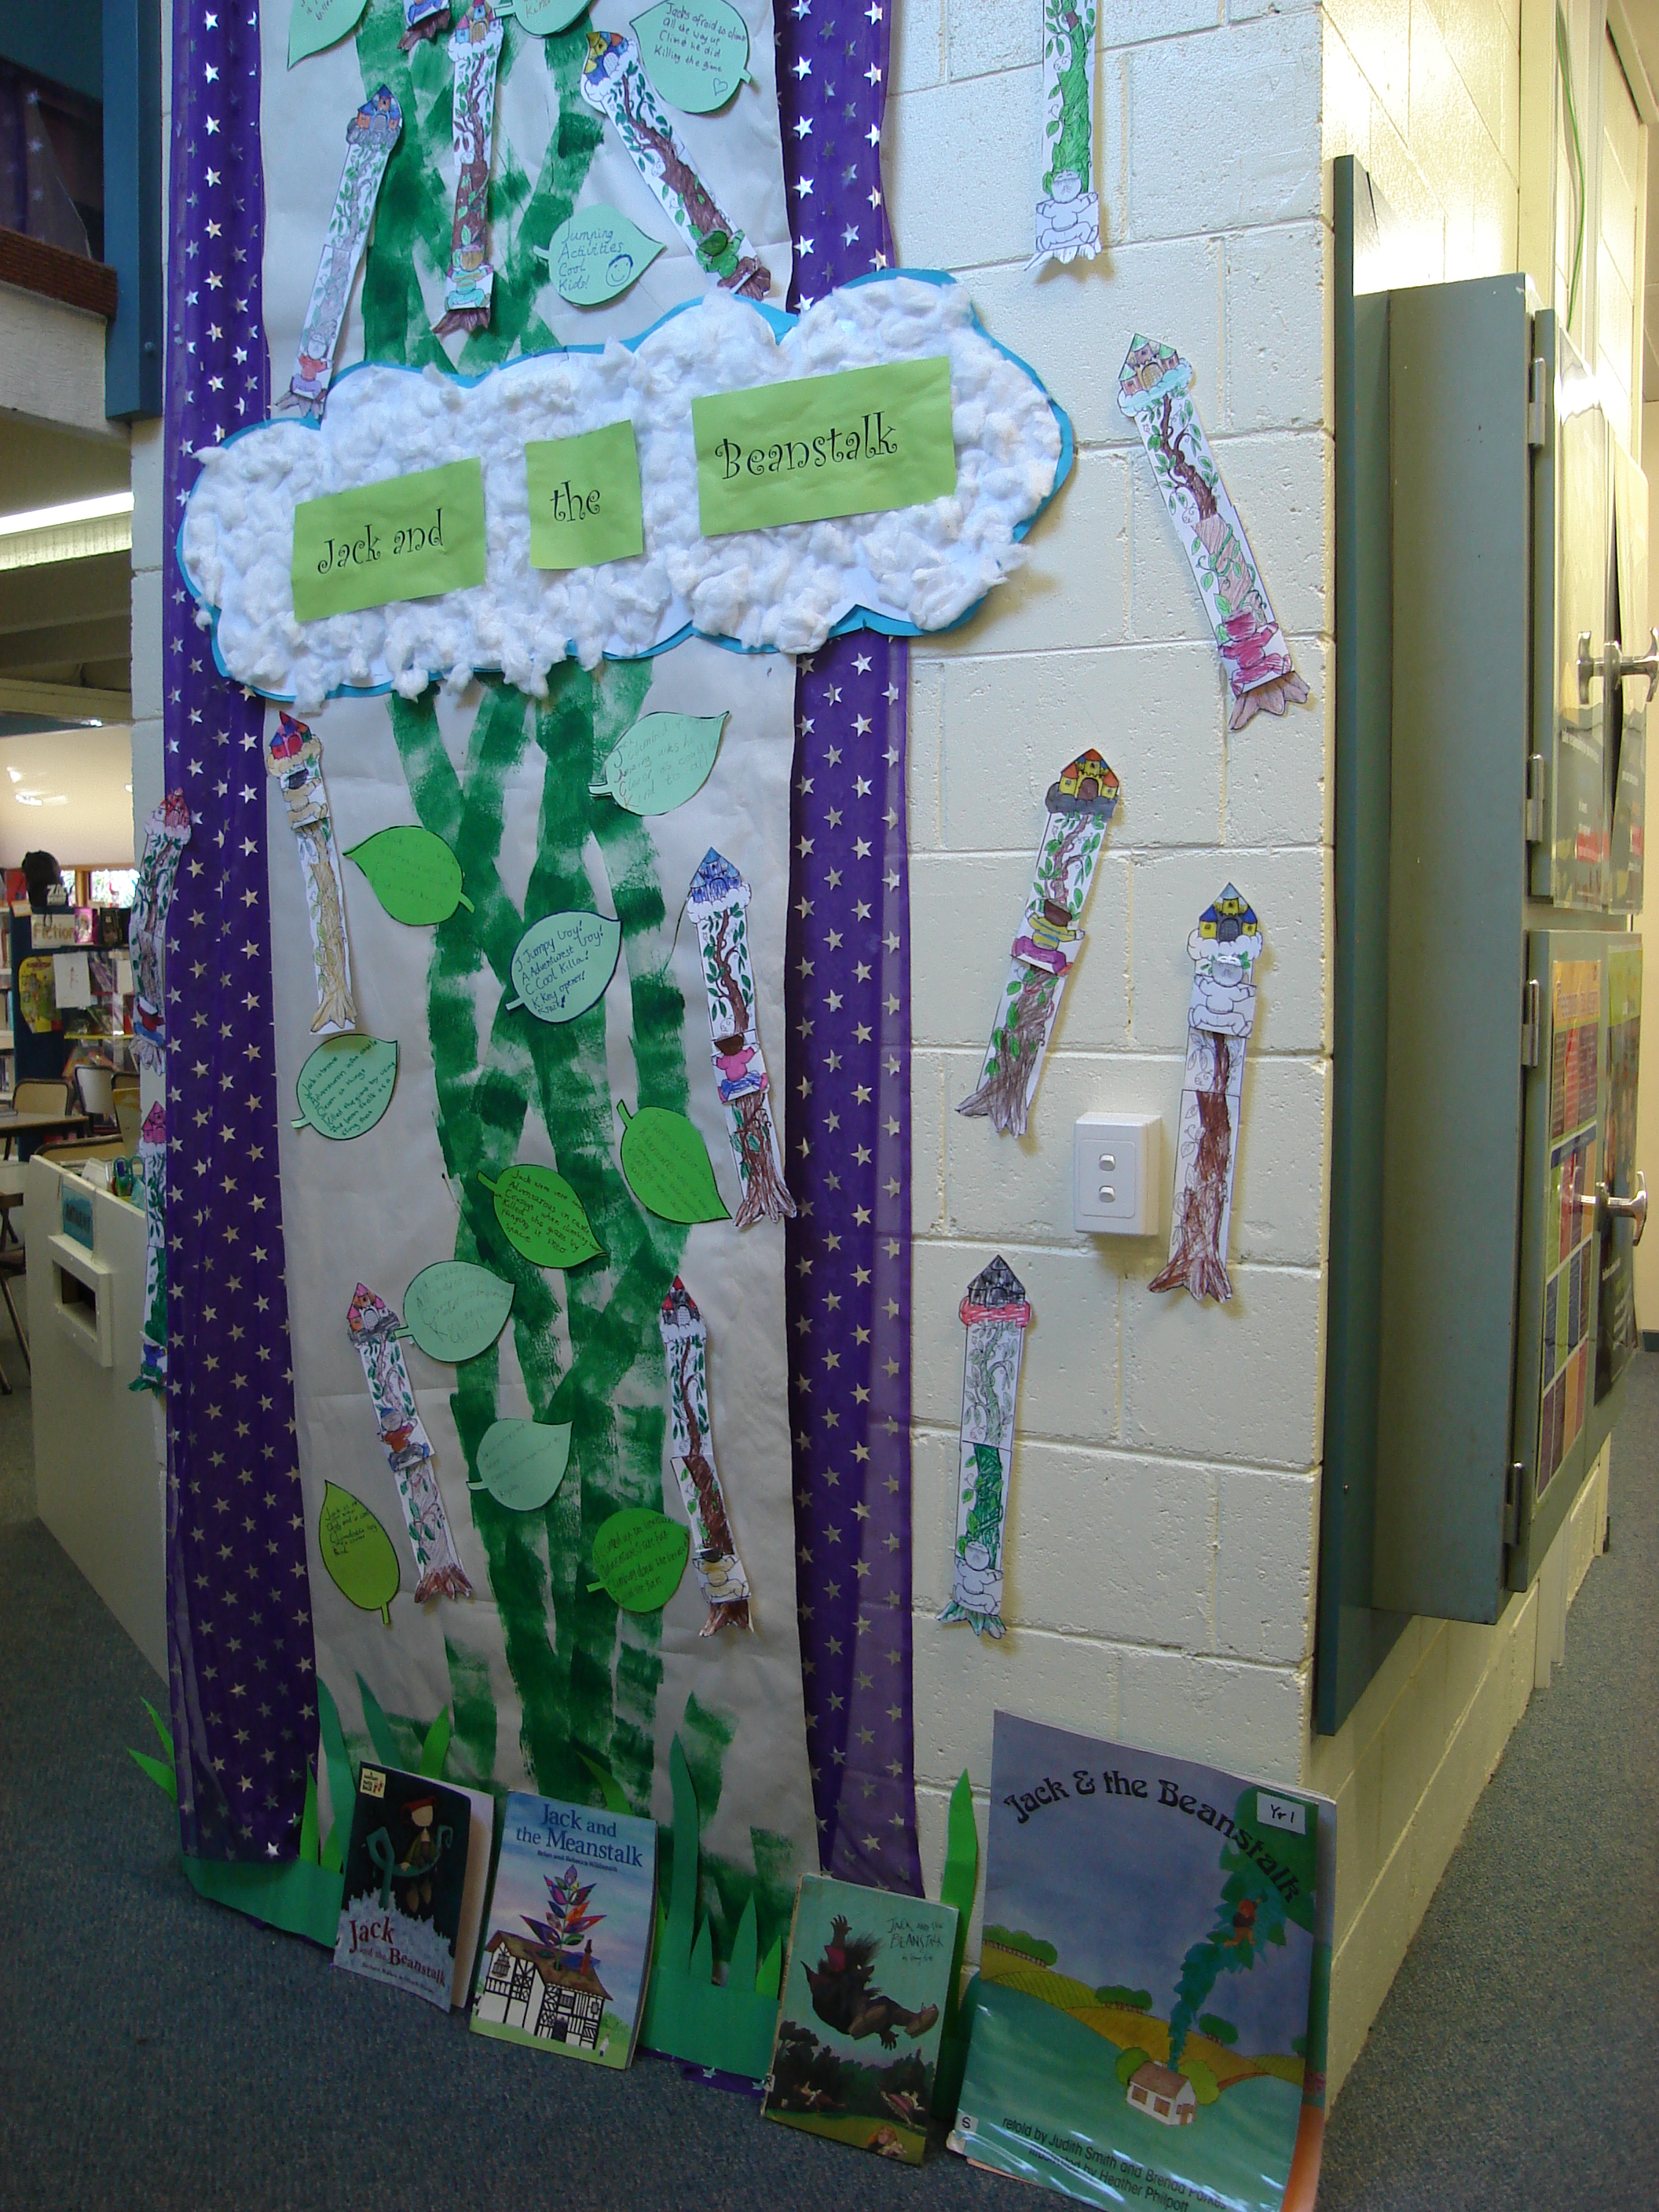 Jack and the Beanstalk display